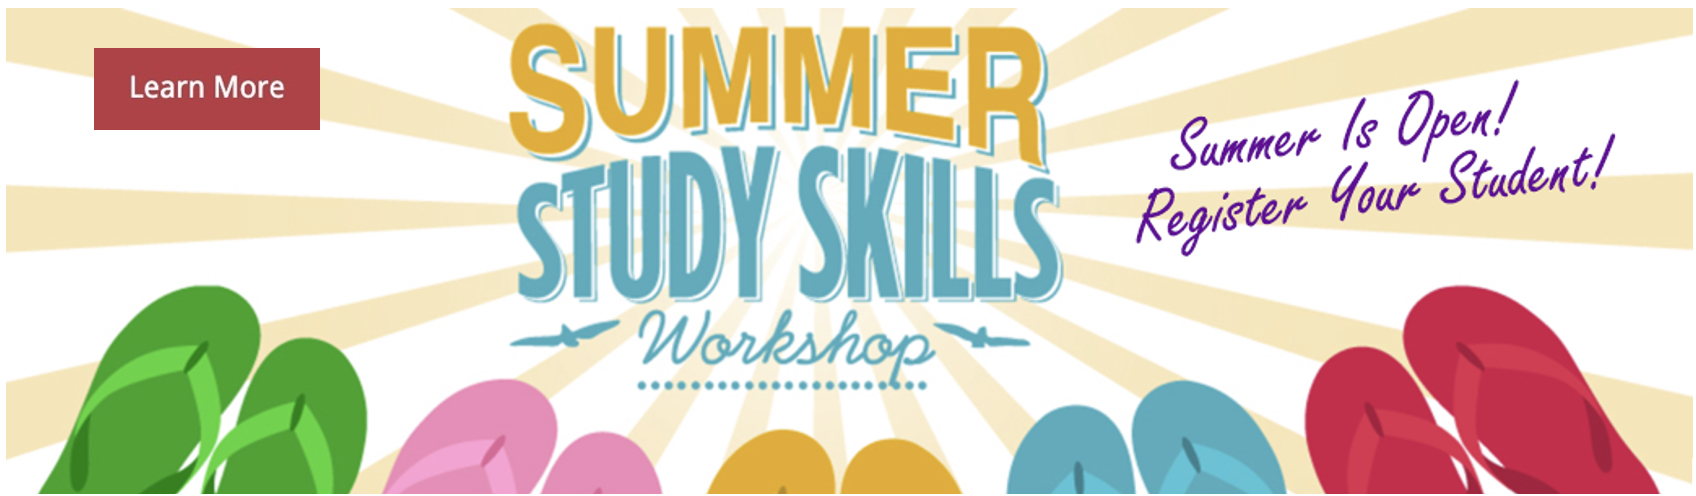 summer-study-skills-executive-function-workshops-fairfield-county-ct-westchester-ny